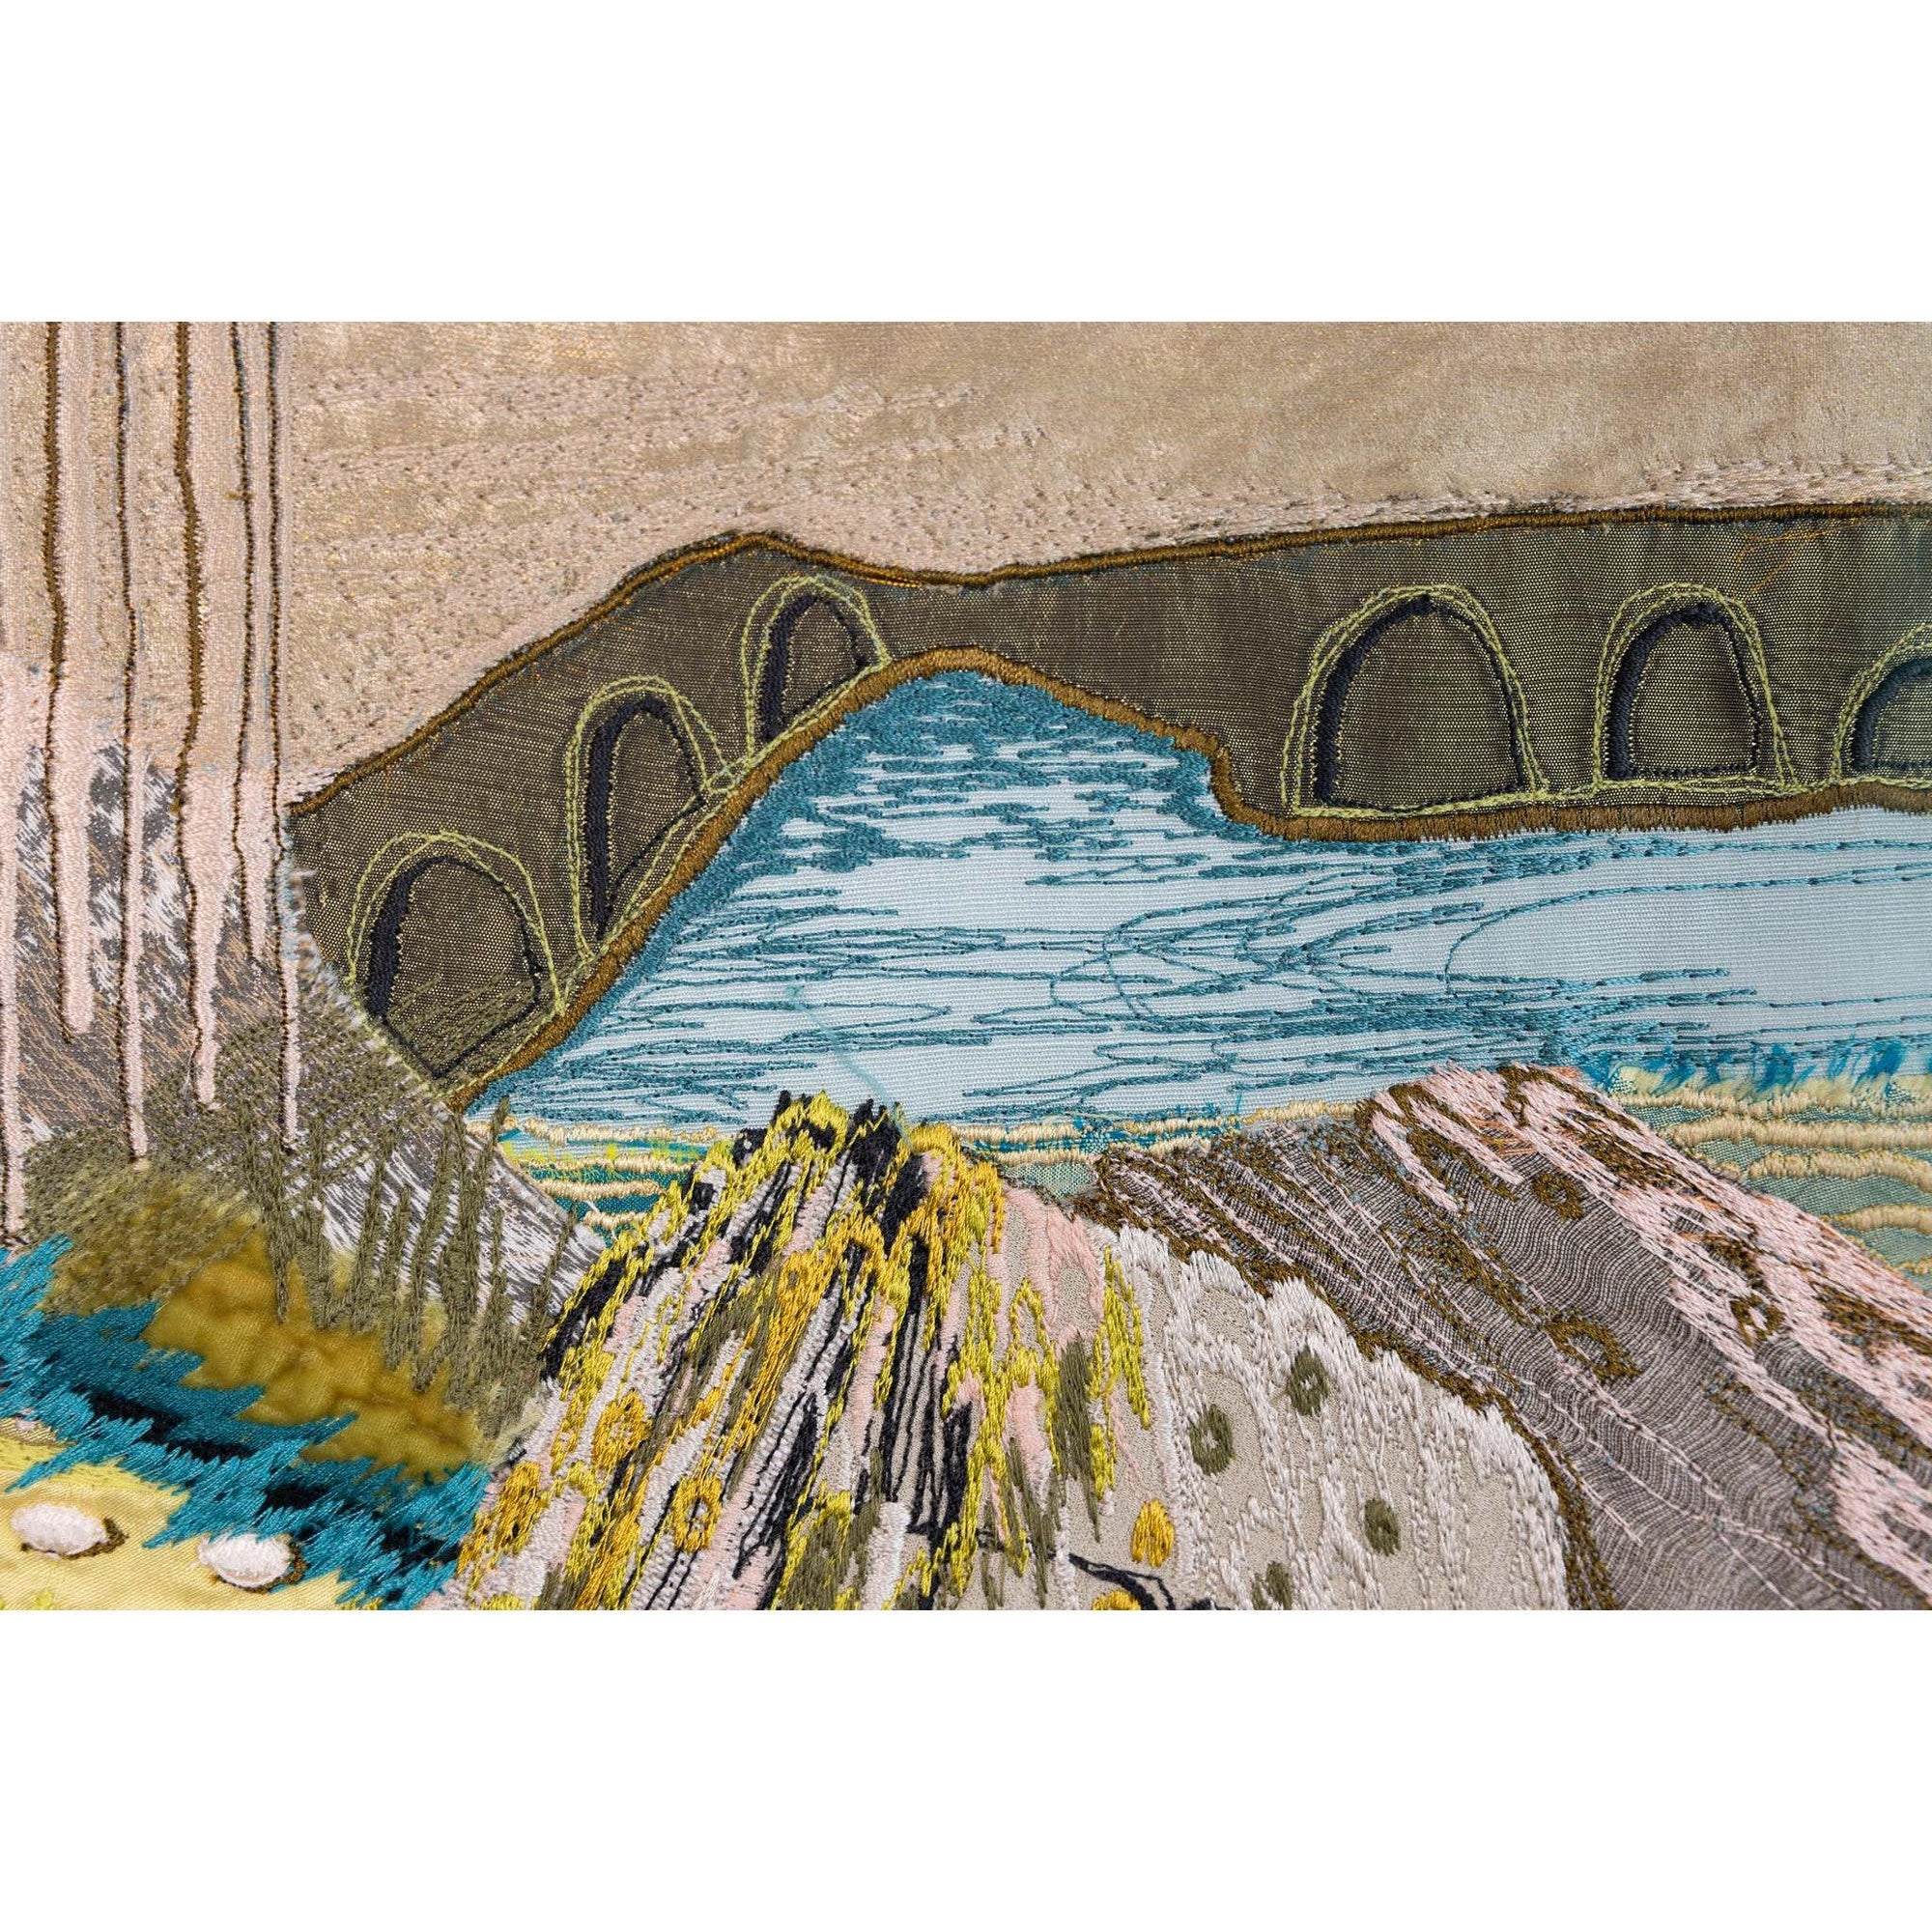 'Turquoise Waters' dynamic stitched textiles by Sarah Pooley, available at Padstow Gallery, Cornwall